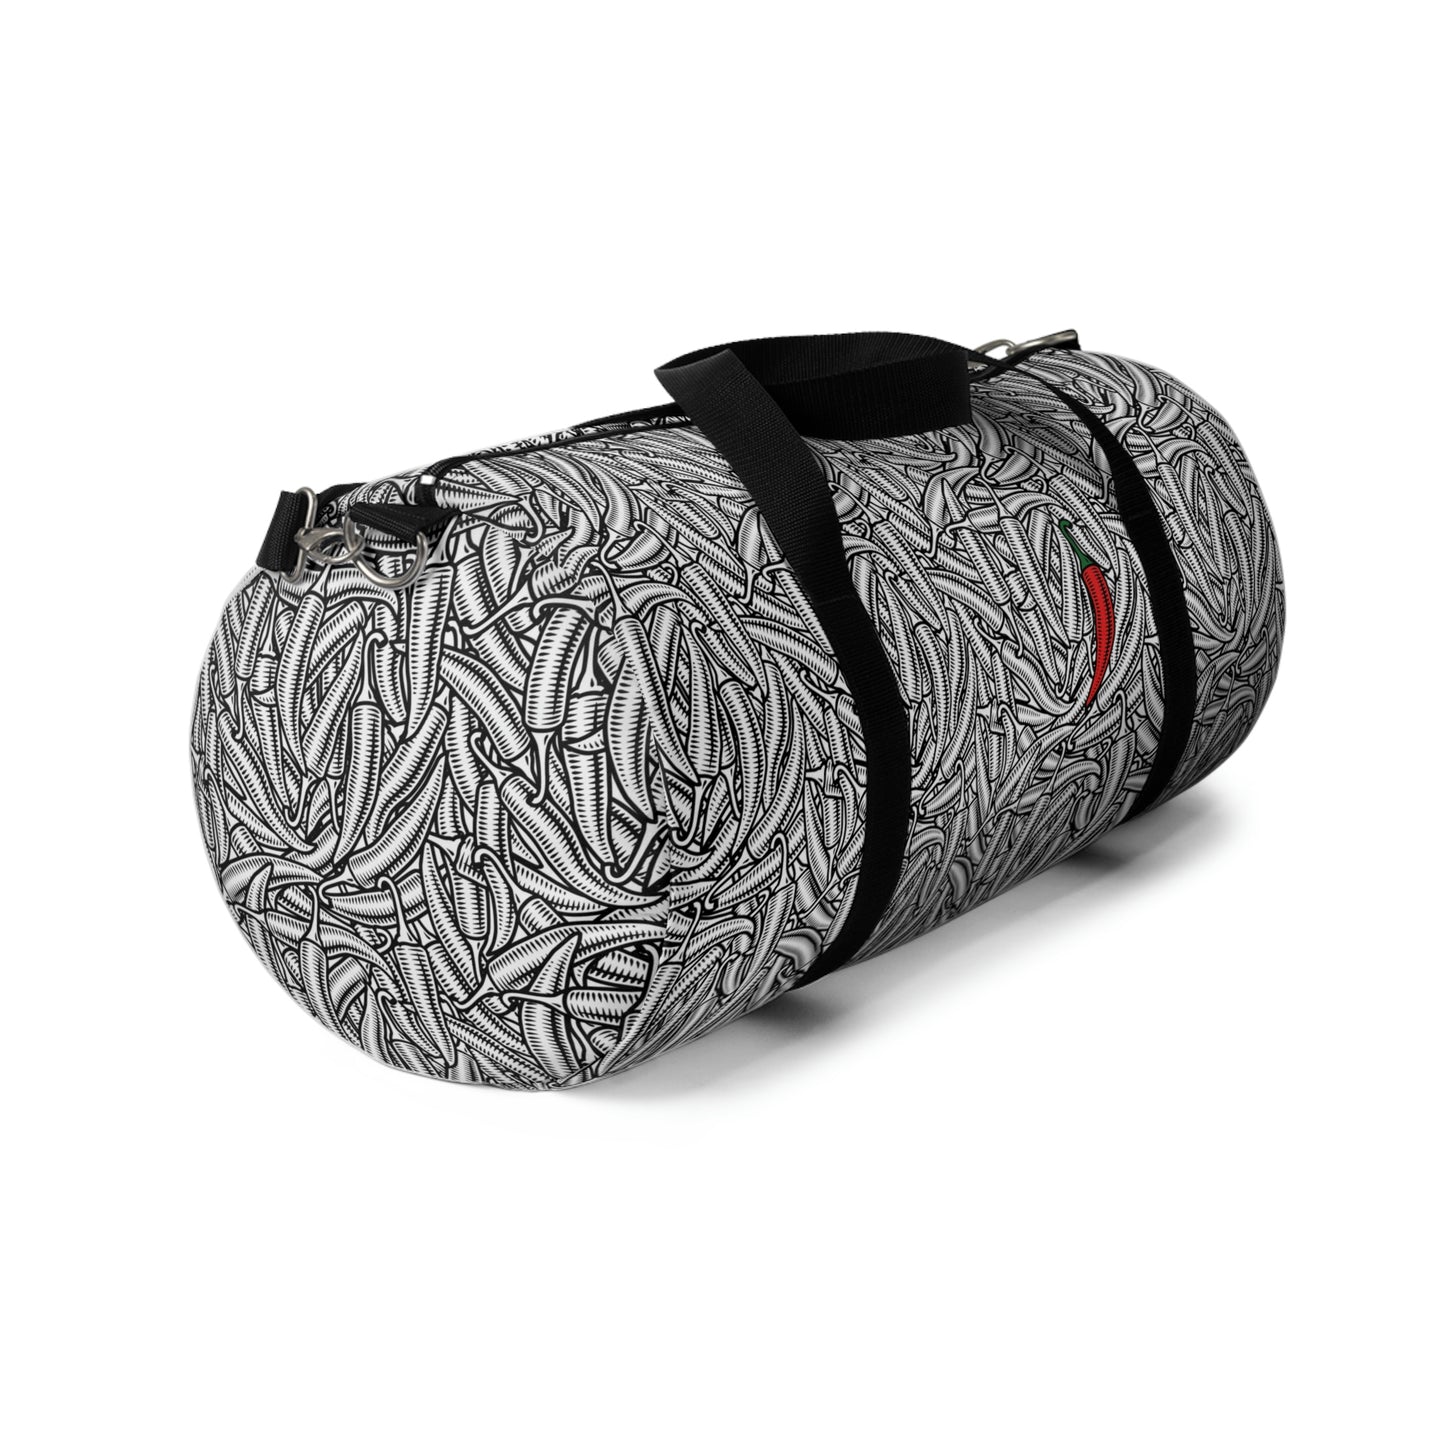 Add a little heat to your travels - Duffel Bag